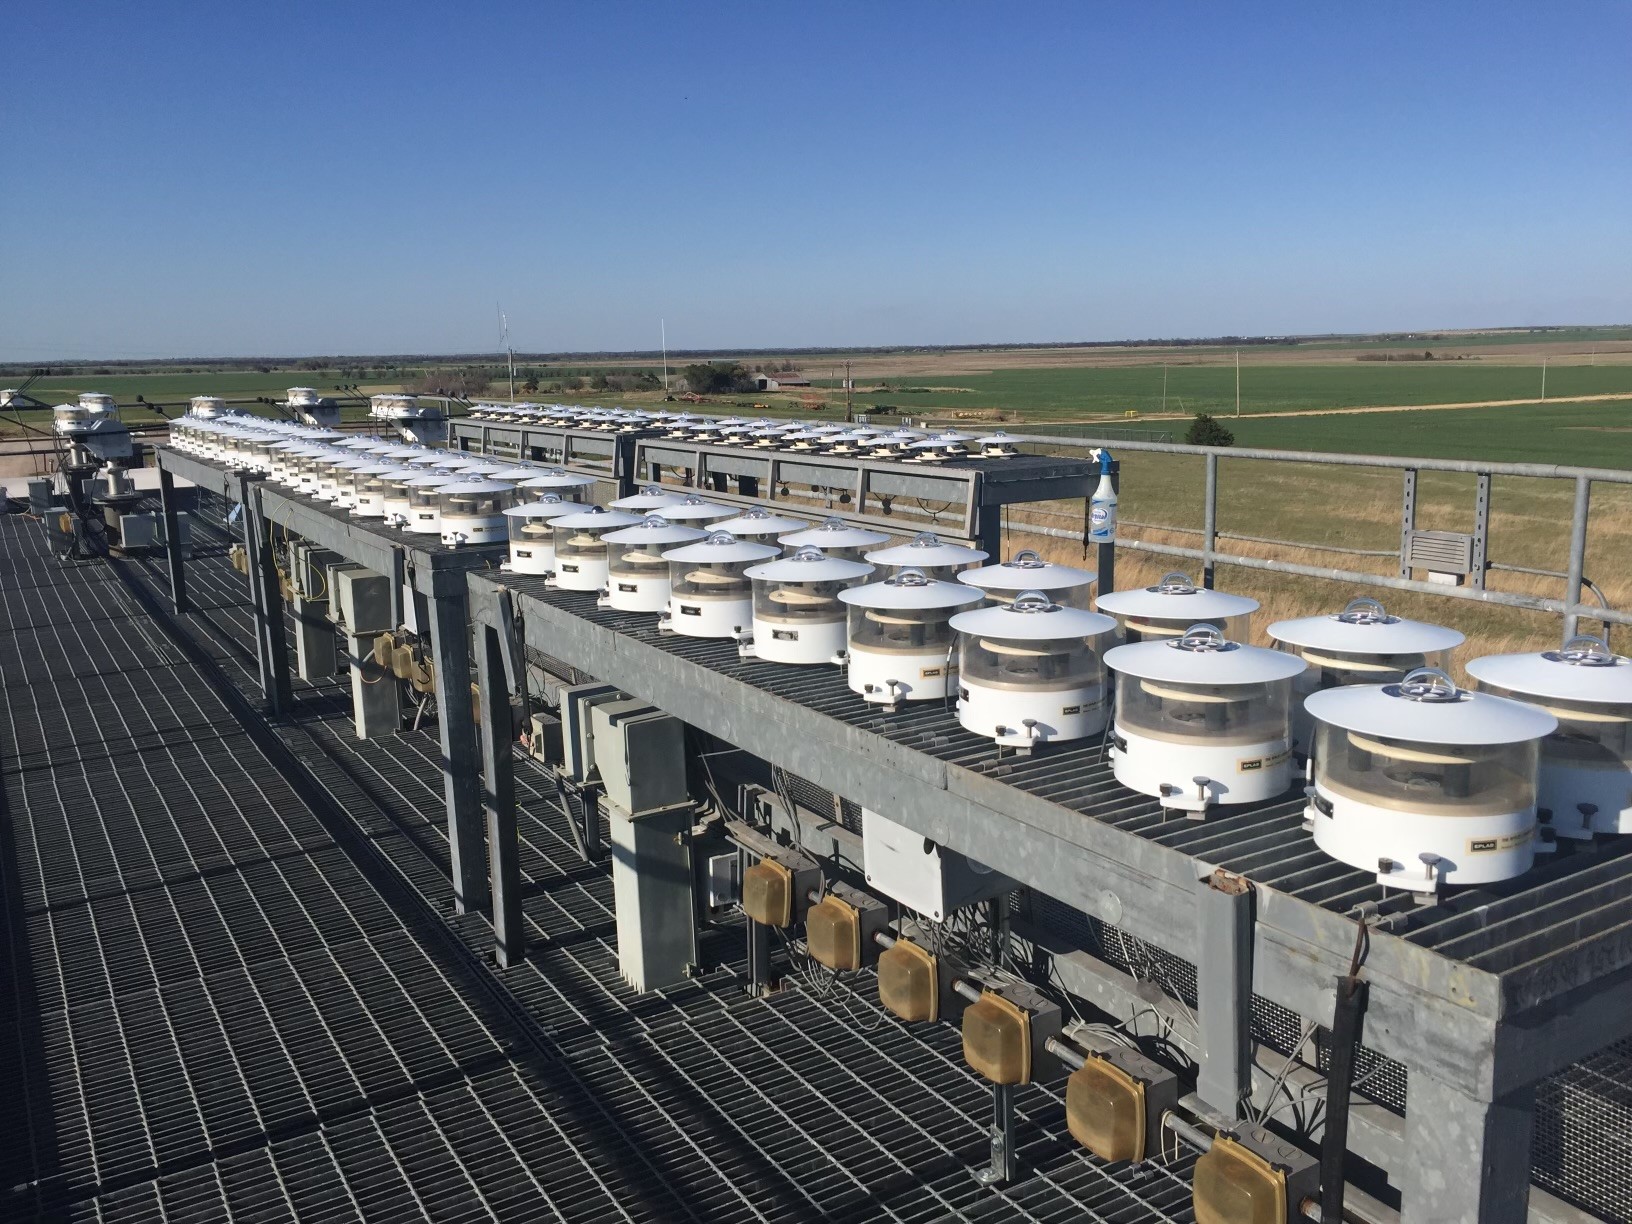 Radiometers are set up for a Broadband Outdoor Radiometer Calibration (BORCAL) session at ARM’s Southern Great Plains atmospheric observatory in Oklahoma. Pyranometers are mounted on two rows of tables. In the background, pyrgeometers are mounted on solar trackers.